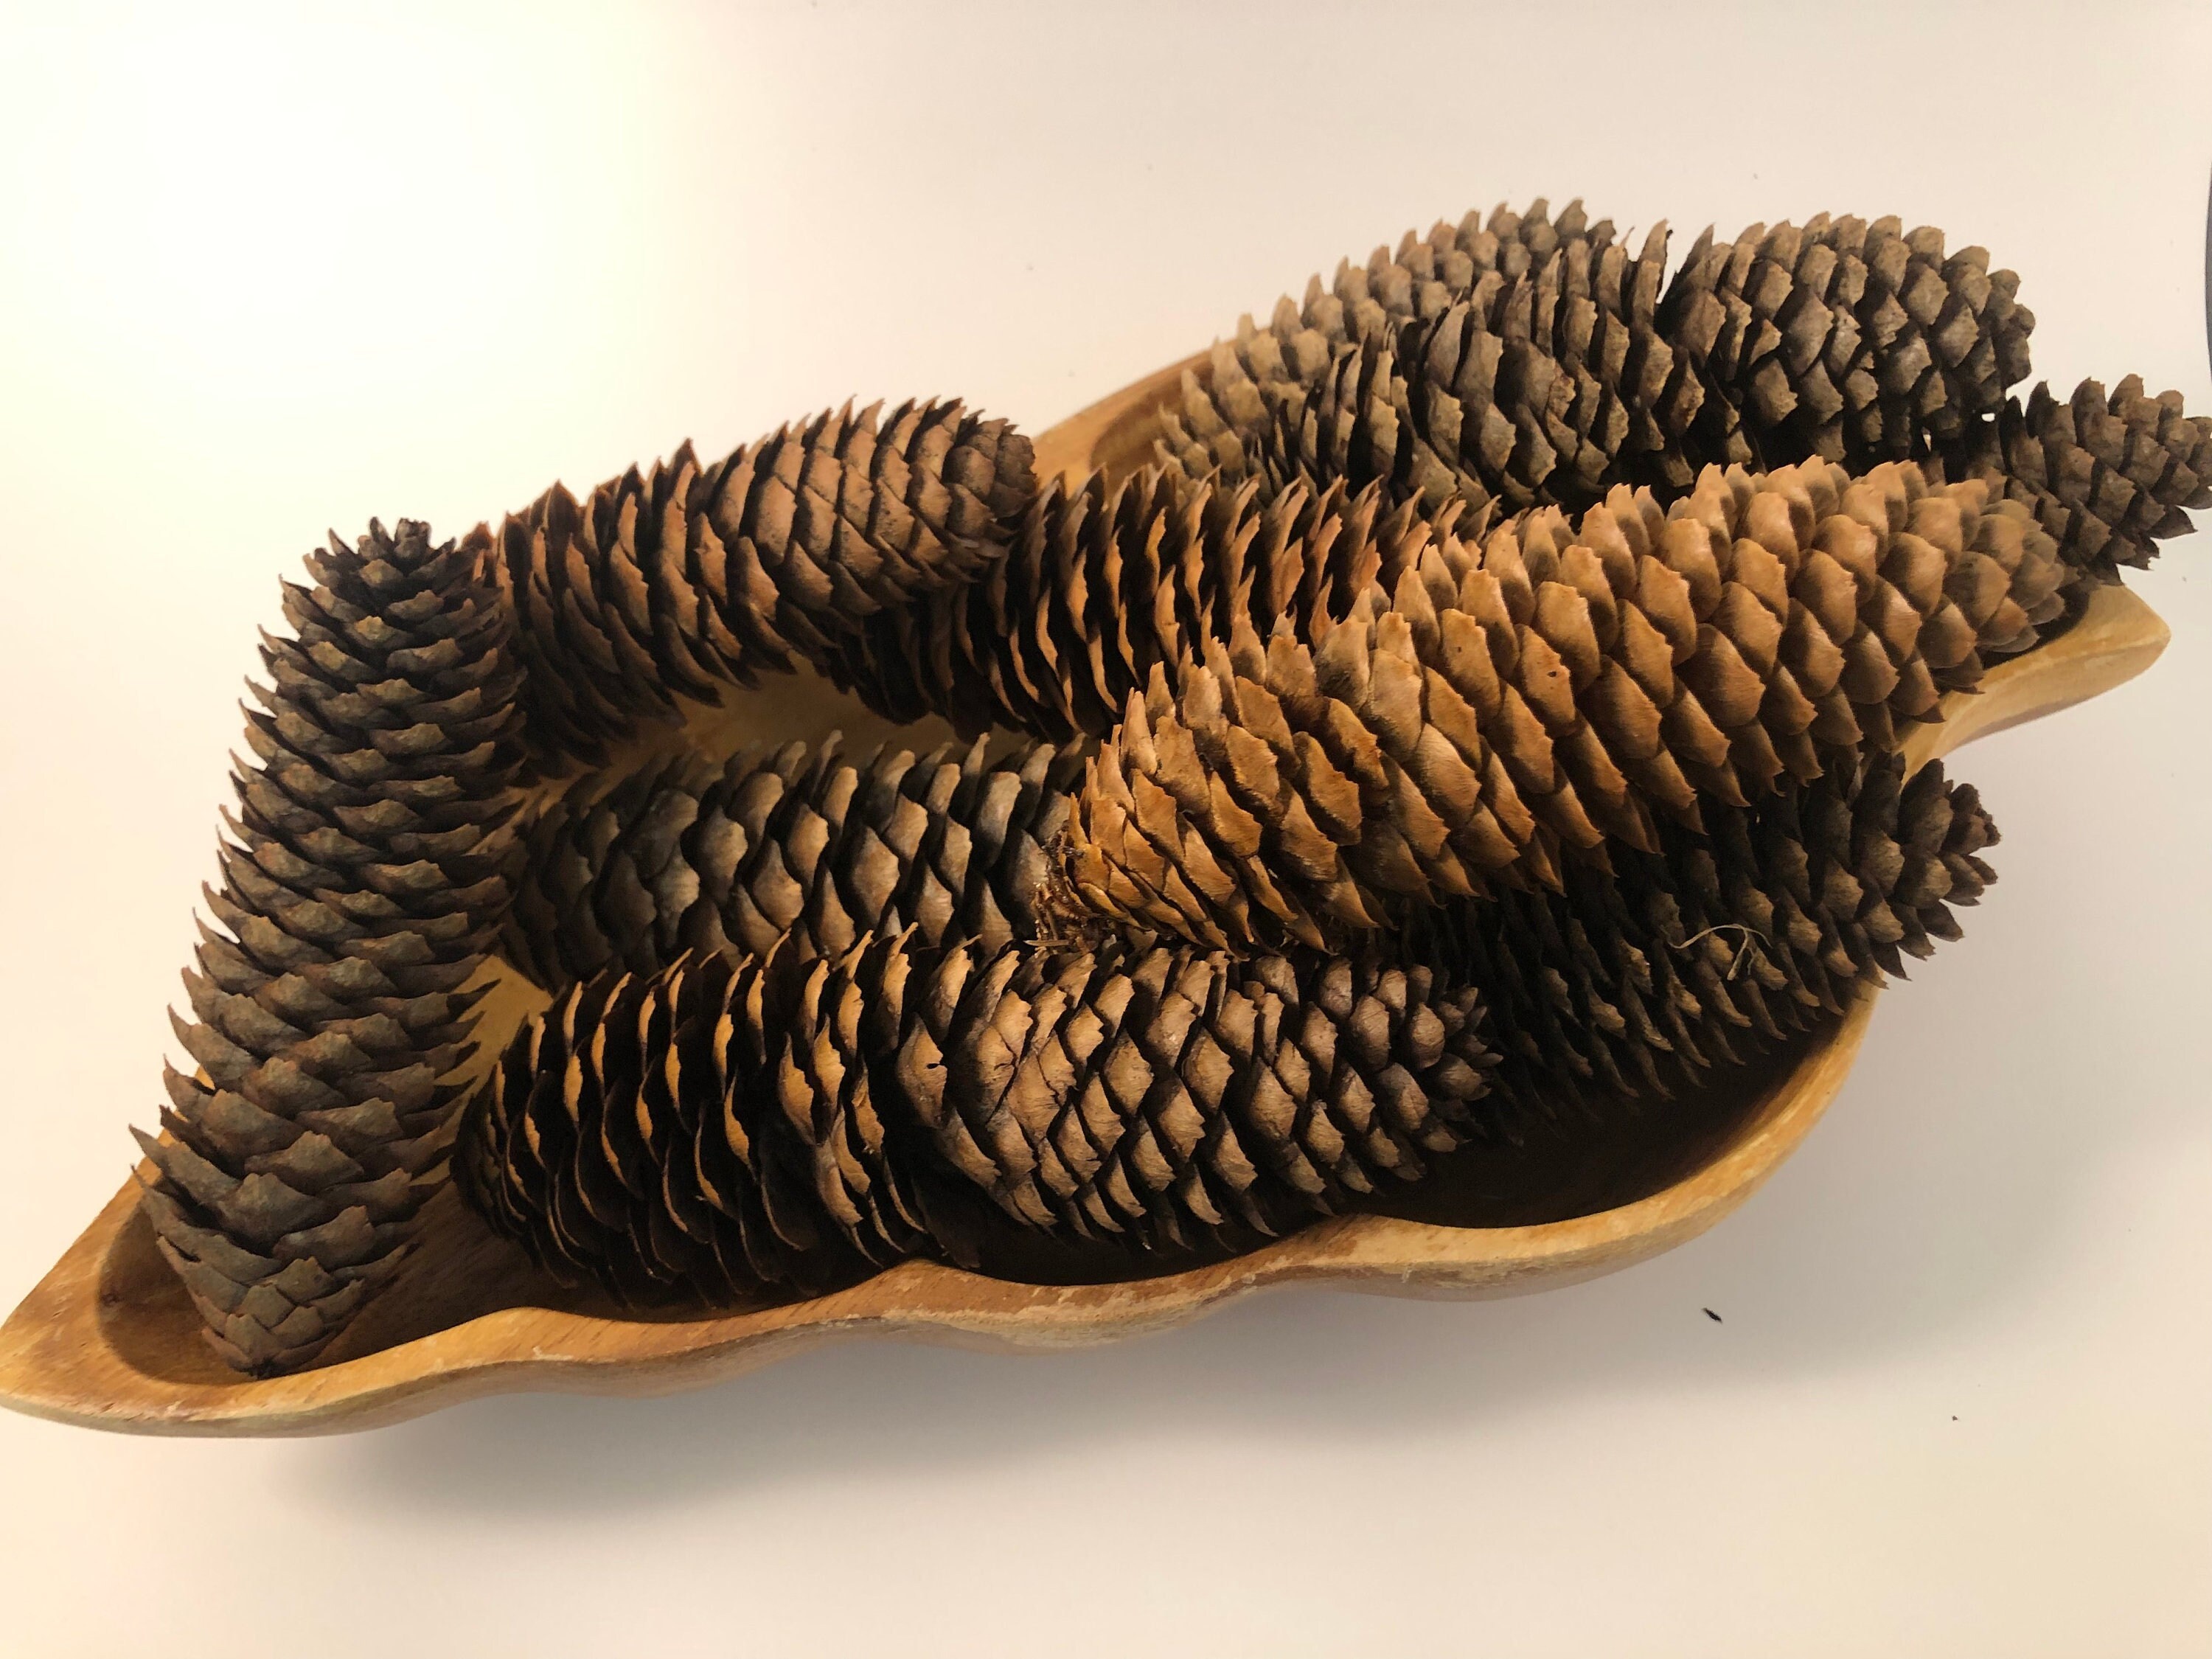 My Texas House, Brown Natural Pinecone Set Tabletop Decoration, 3 Count, 7